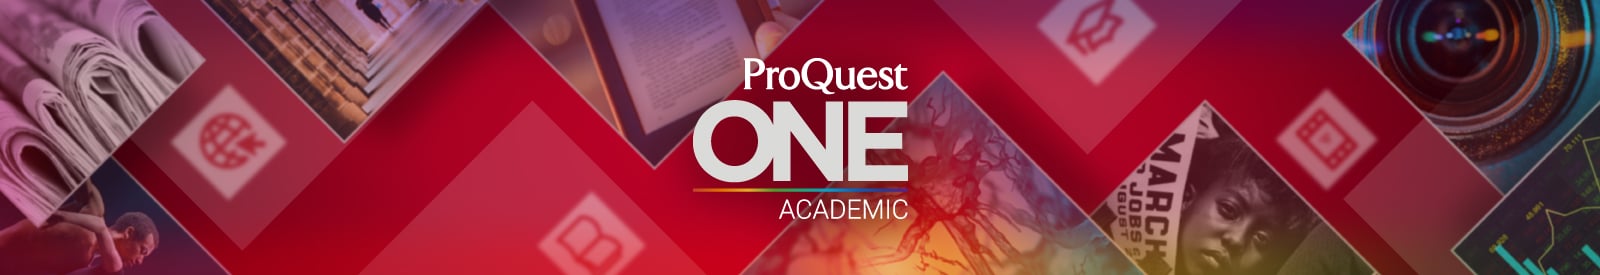 9 Reasons Librarians Love ProQuest One Academic